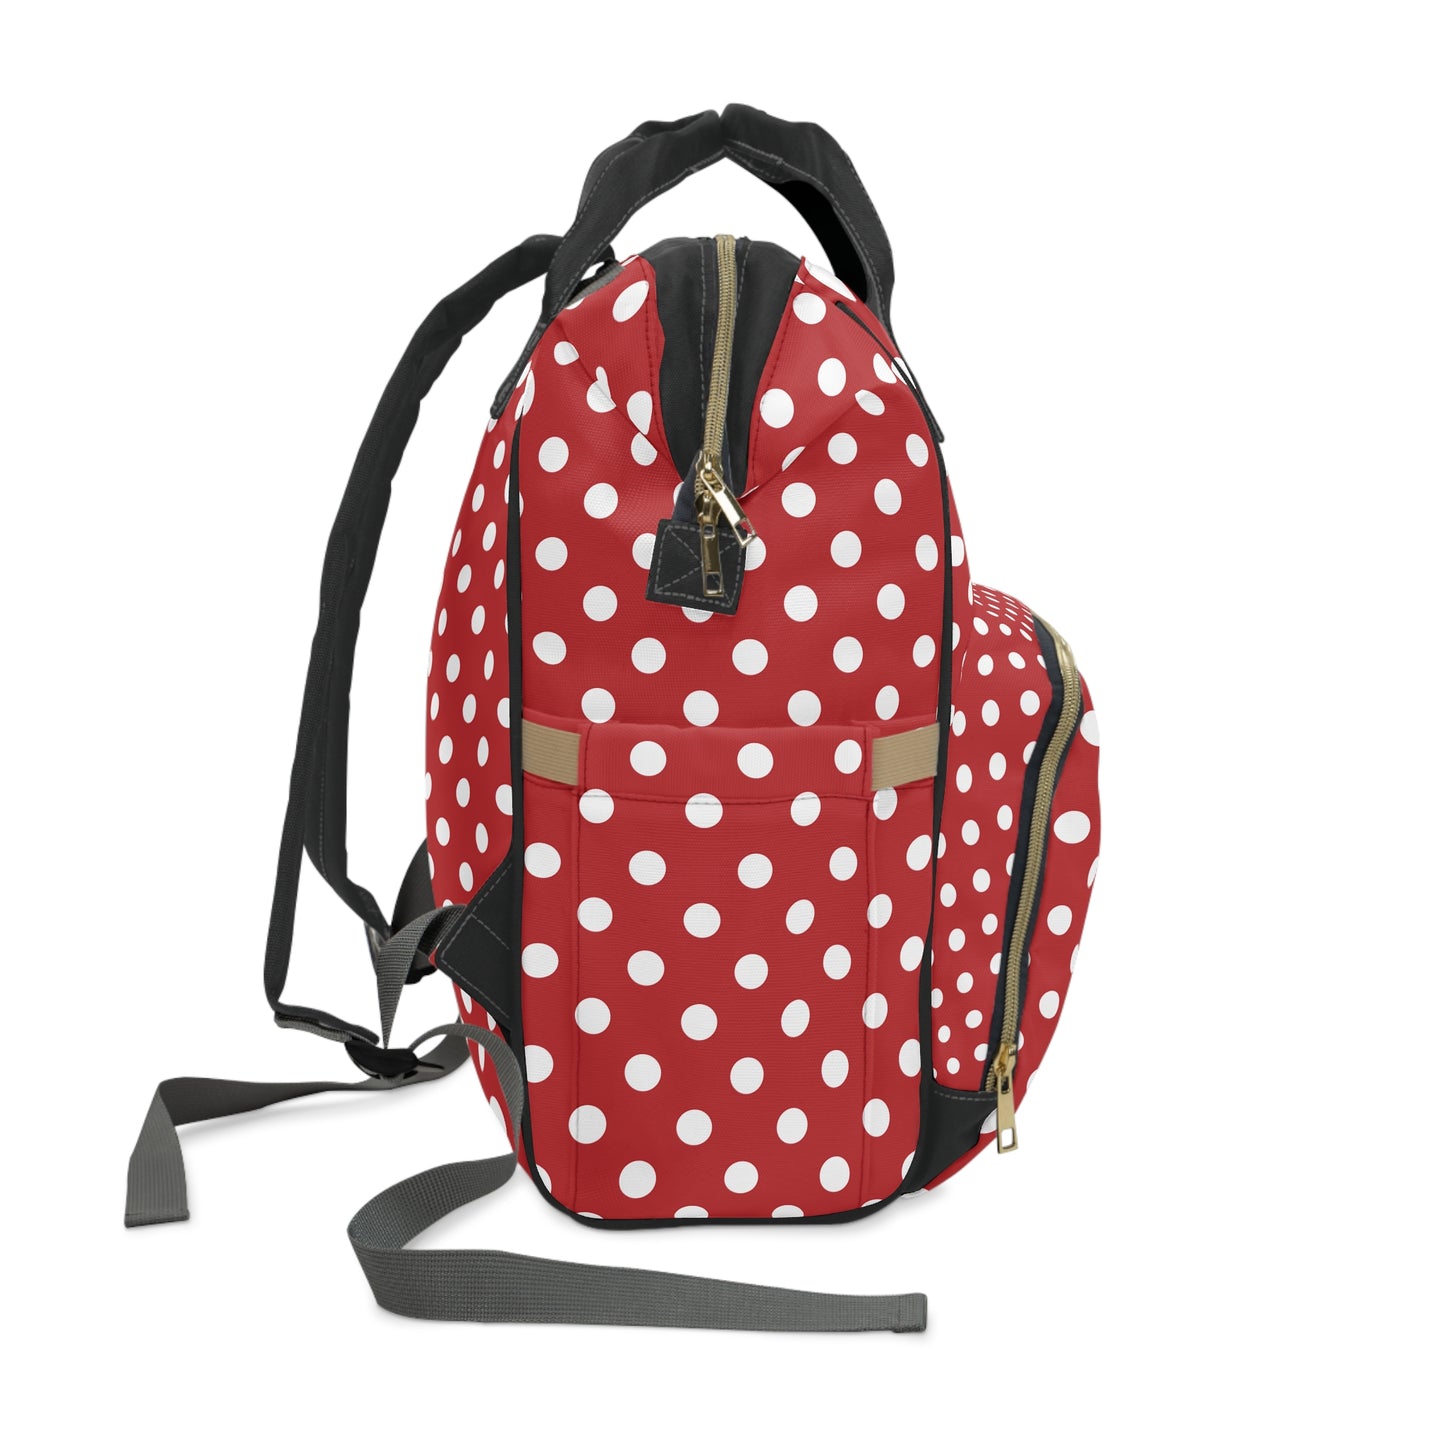 Red Polka Dot Delight: Playful and Chic Backpack